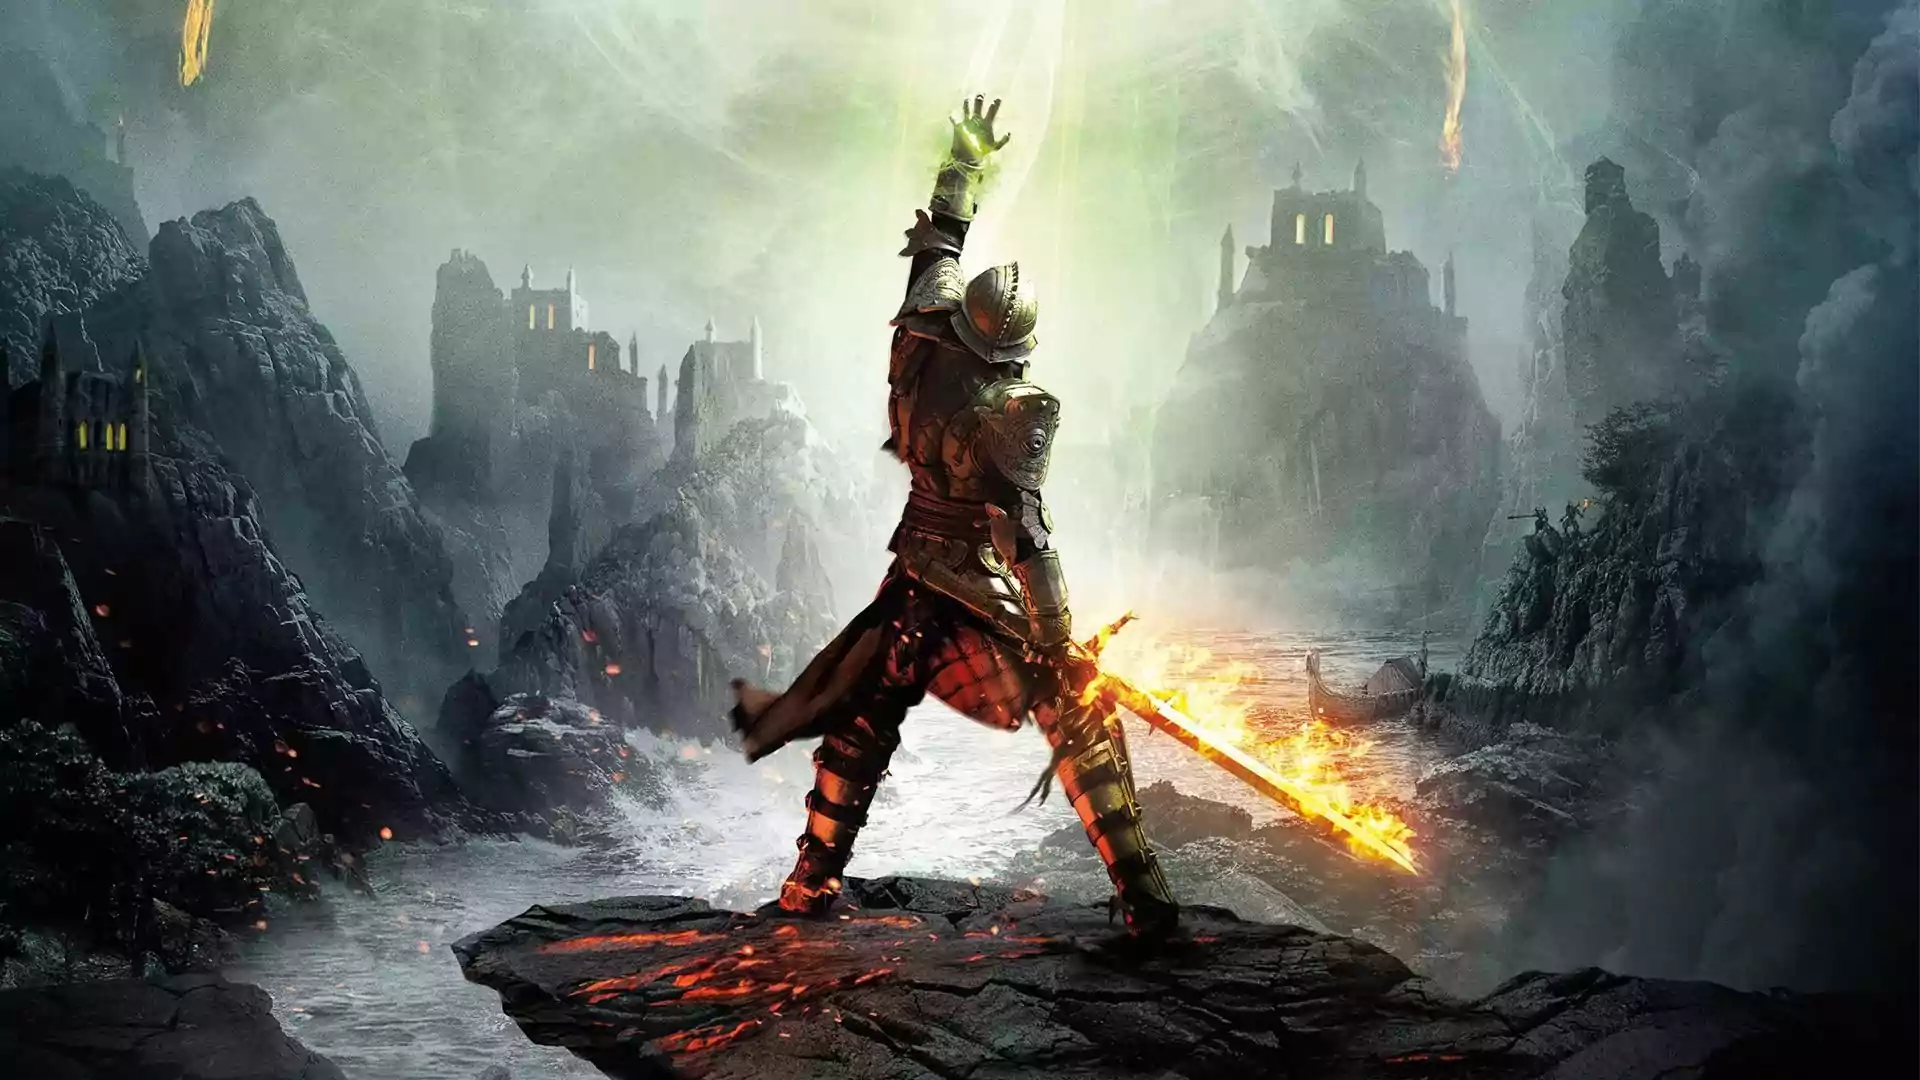 Dragon Age 4 Is In Development! Producer Spills Details